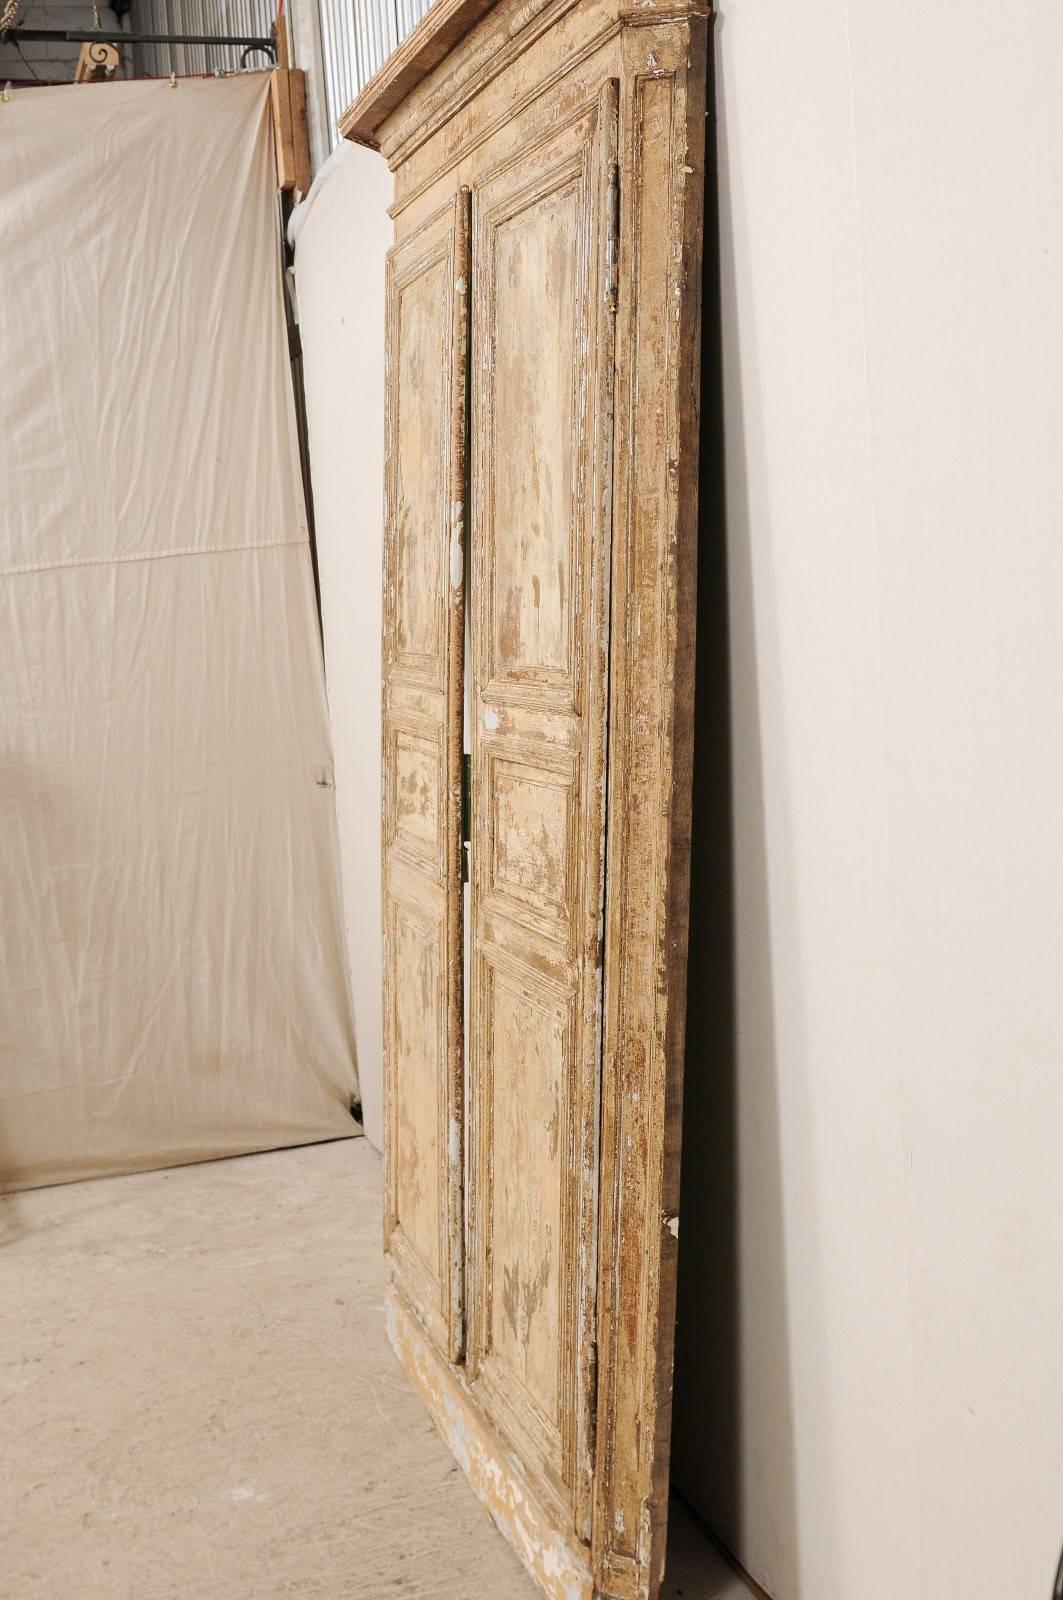 An Italian Pair of Early 19th C. Wood Doors Within Original Casing & Molding For Sale 2